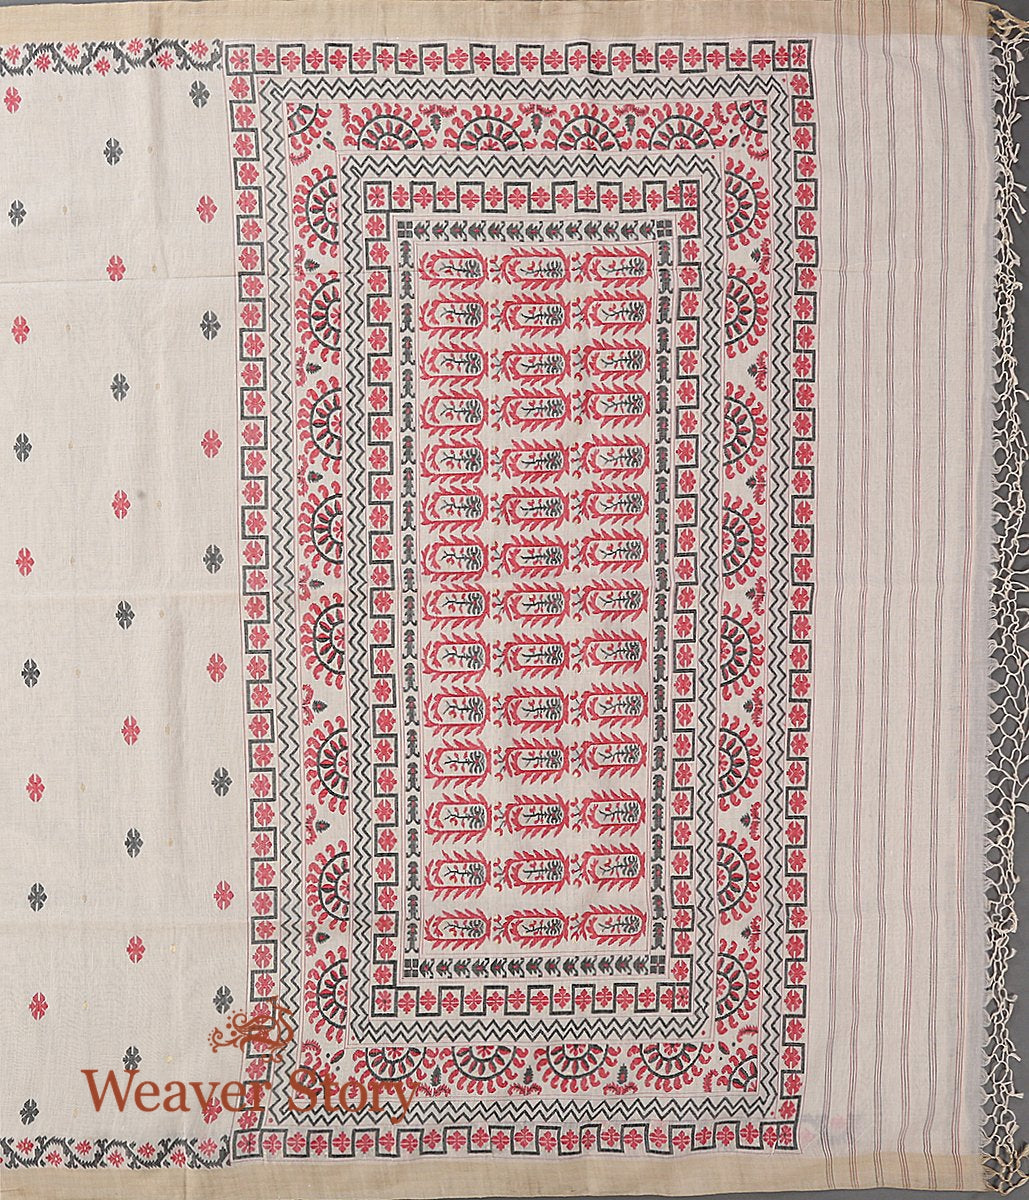 Beige_Hand_Spun_and_Hand_Woven_Cotton_Jamdani_Saree_with_Red_and_Black_Border_WeaverStory_03